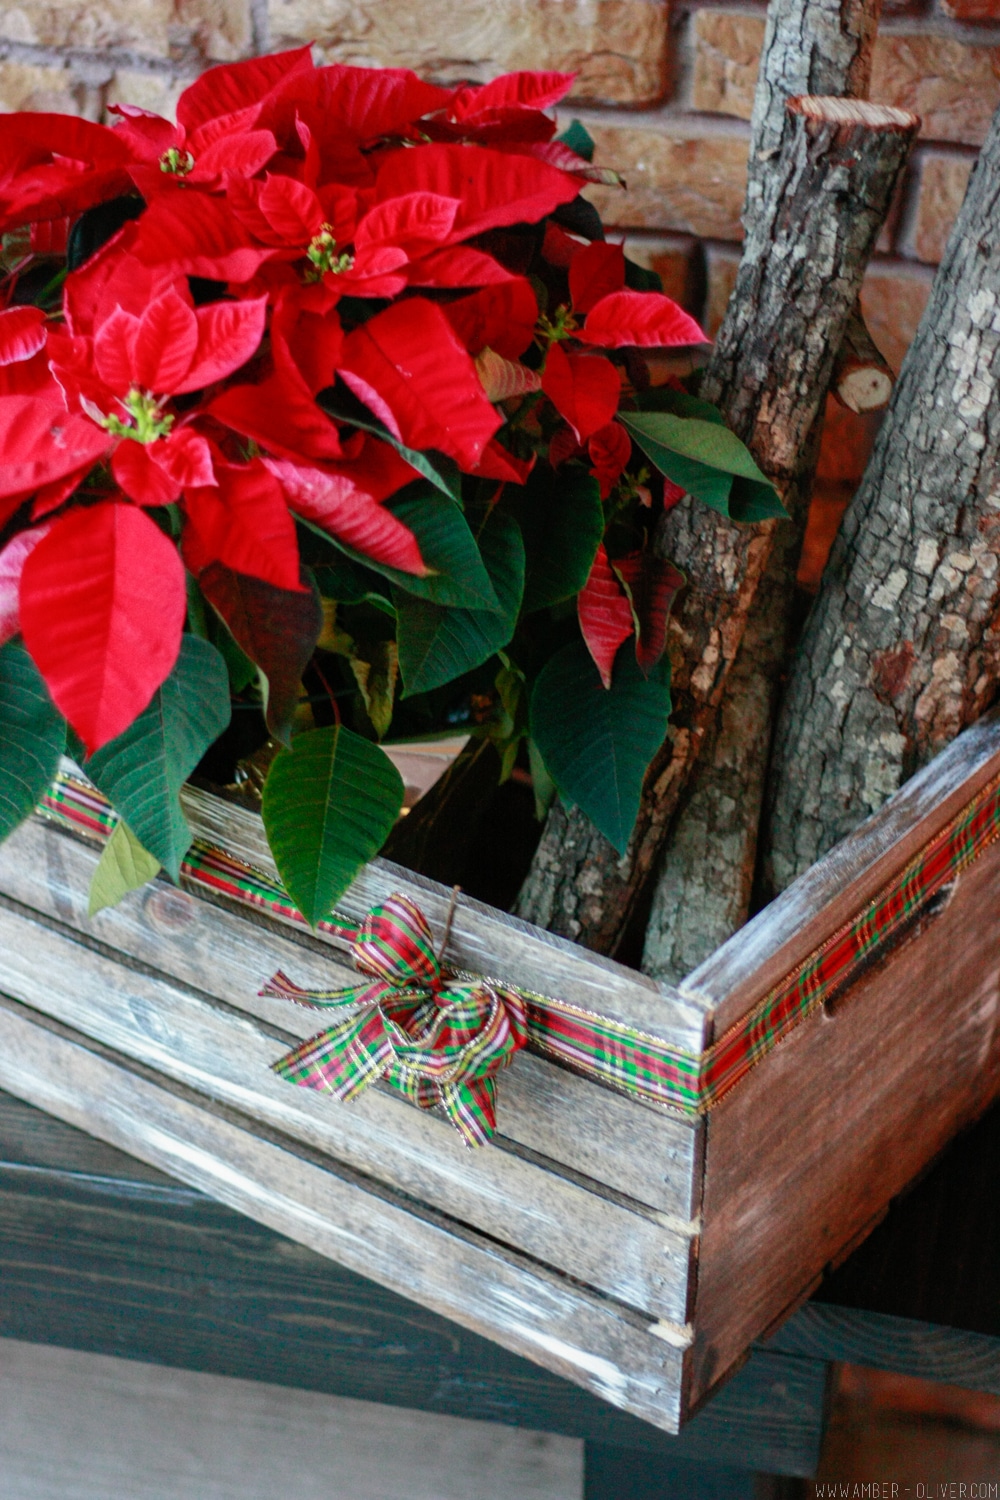 DIY Christmas crate - how to create weather and distressed wood